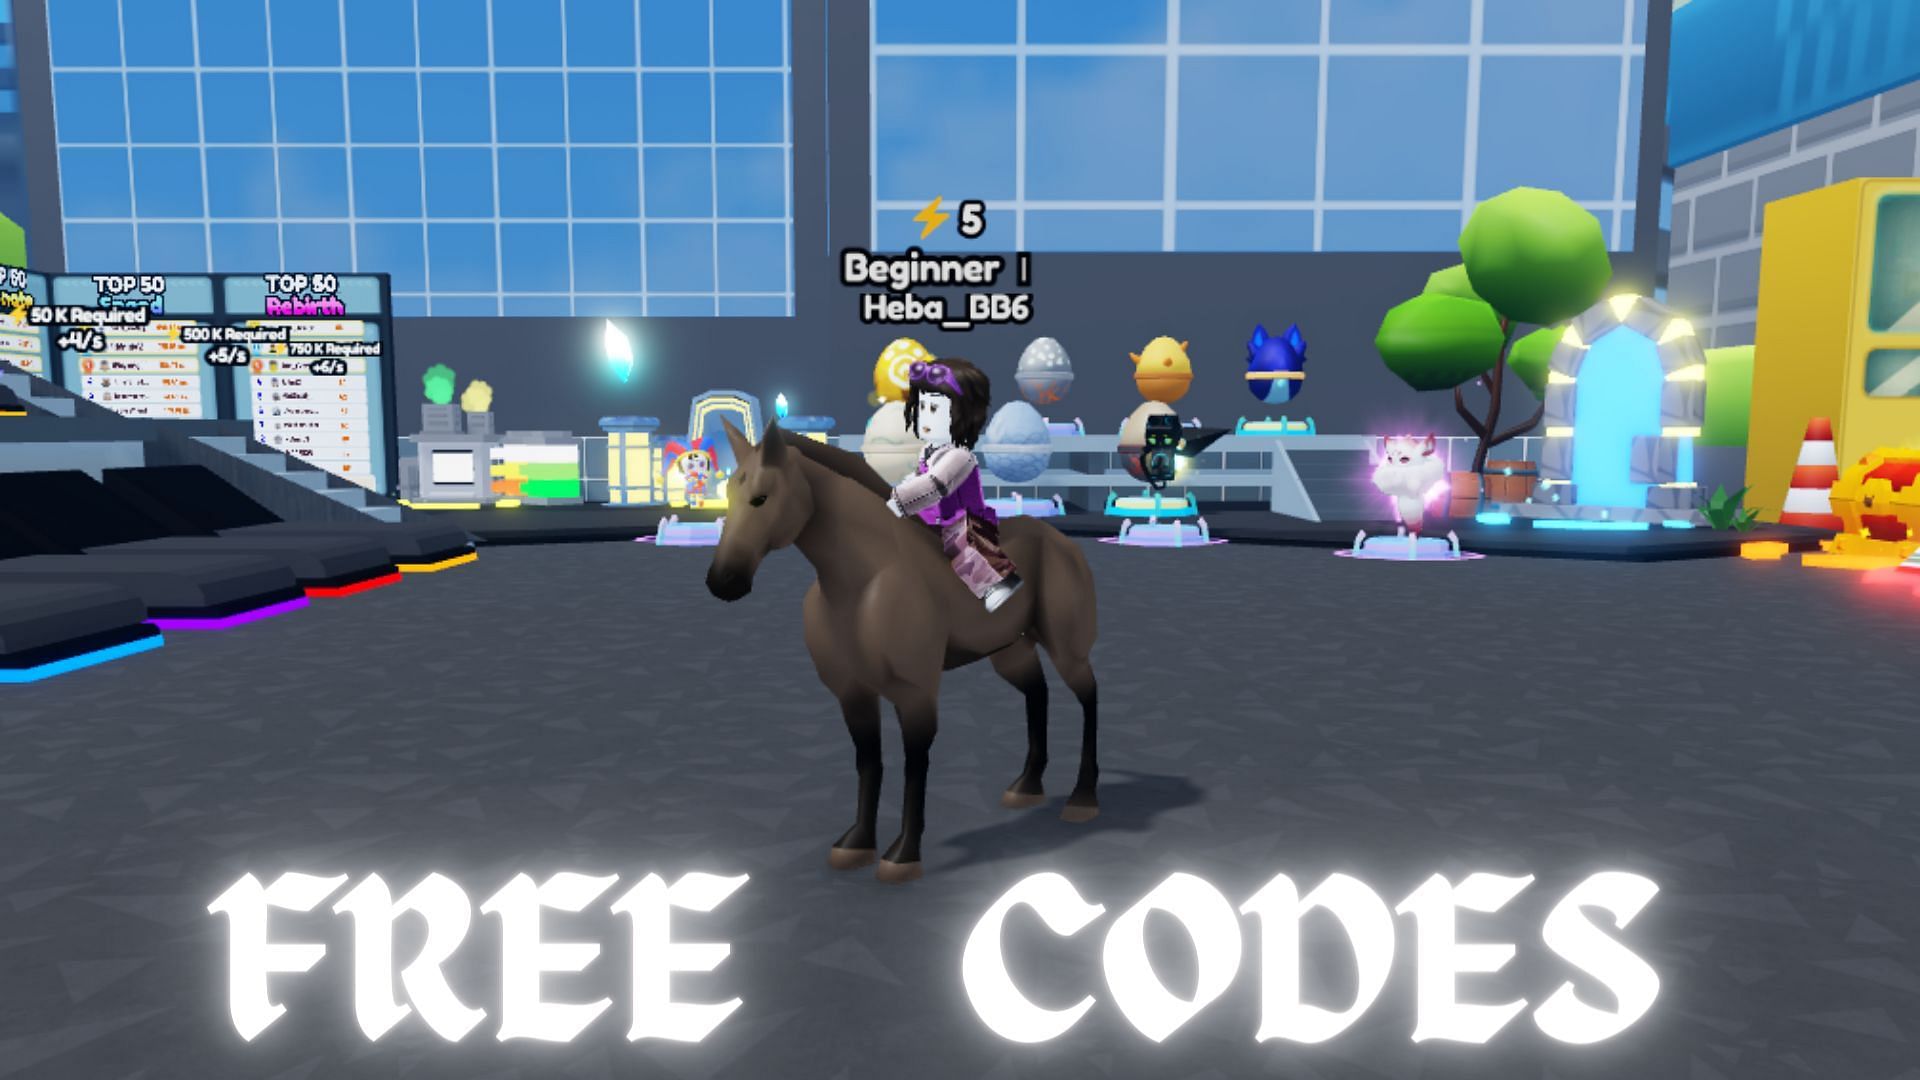 There are many free active codes in Horse Race Simulator (Image via Roblox || Sportskeeda)